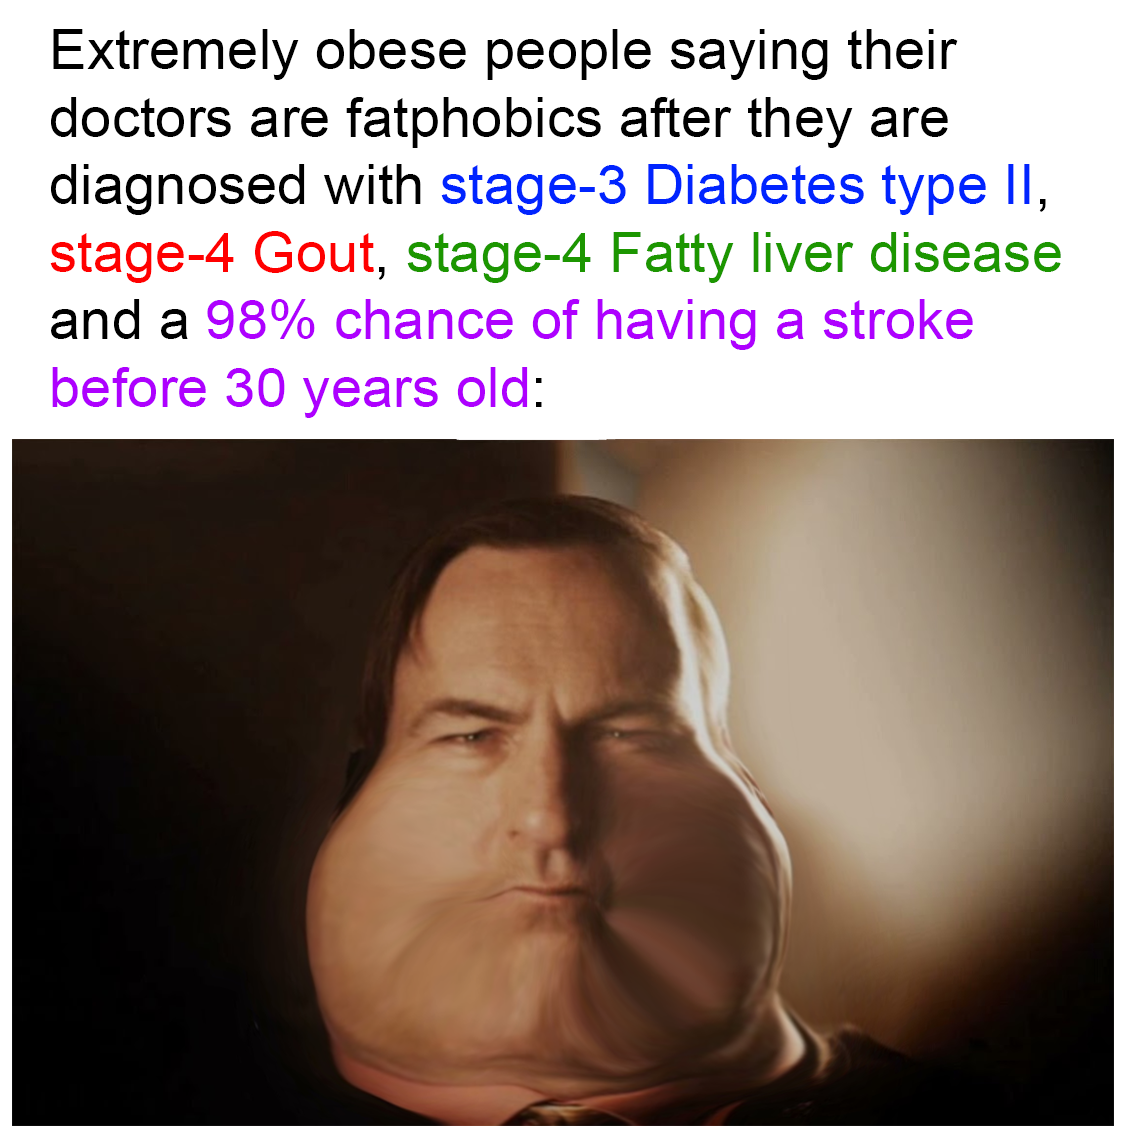 meme stream - head - Extremely obese people saying their doctors are fatphobics after they are diagnosed with stage3 Diabetes type Ii, stage4 Gout, stage4 Fatty liver disease and a 98% chance of having a stroke before 30 years old